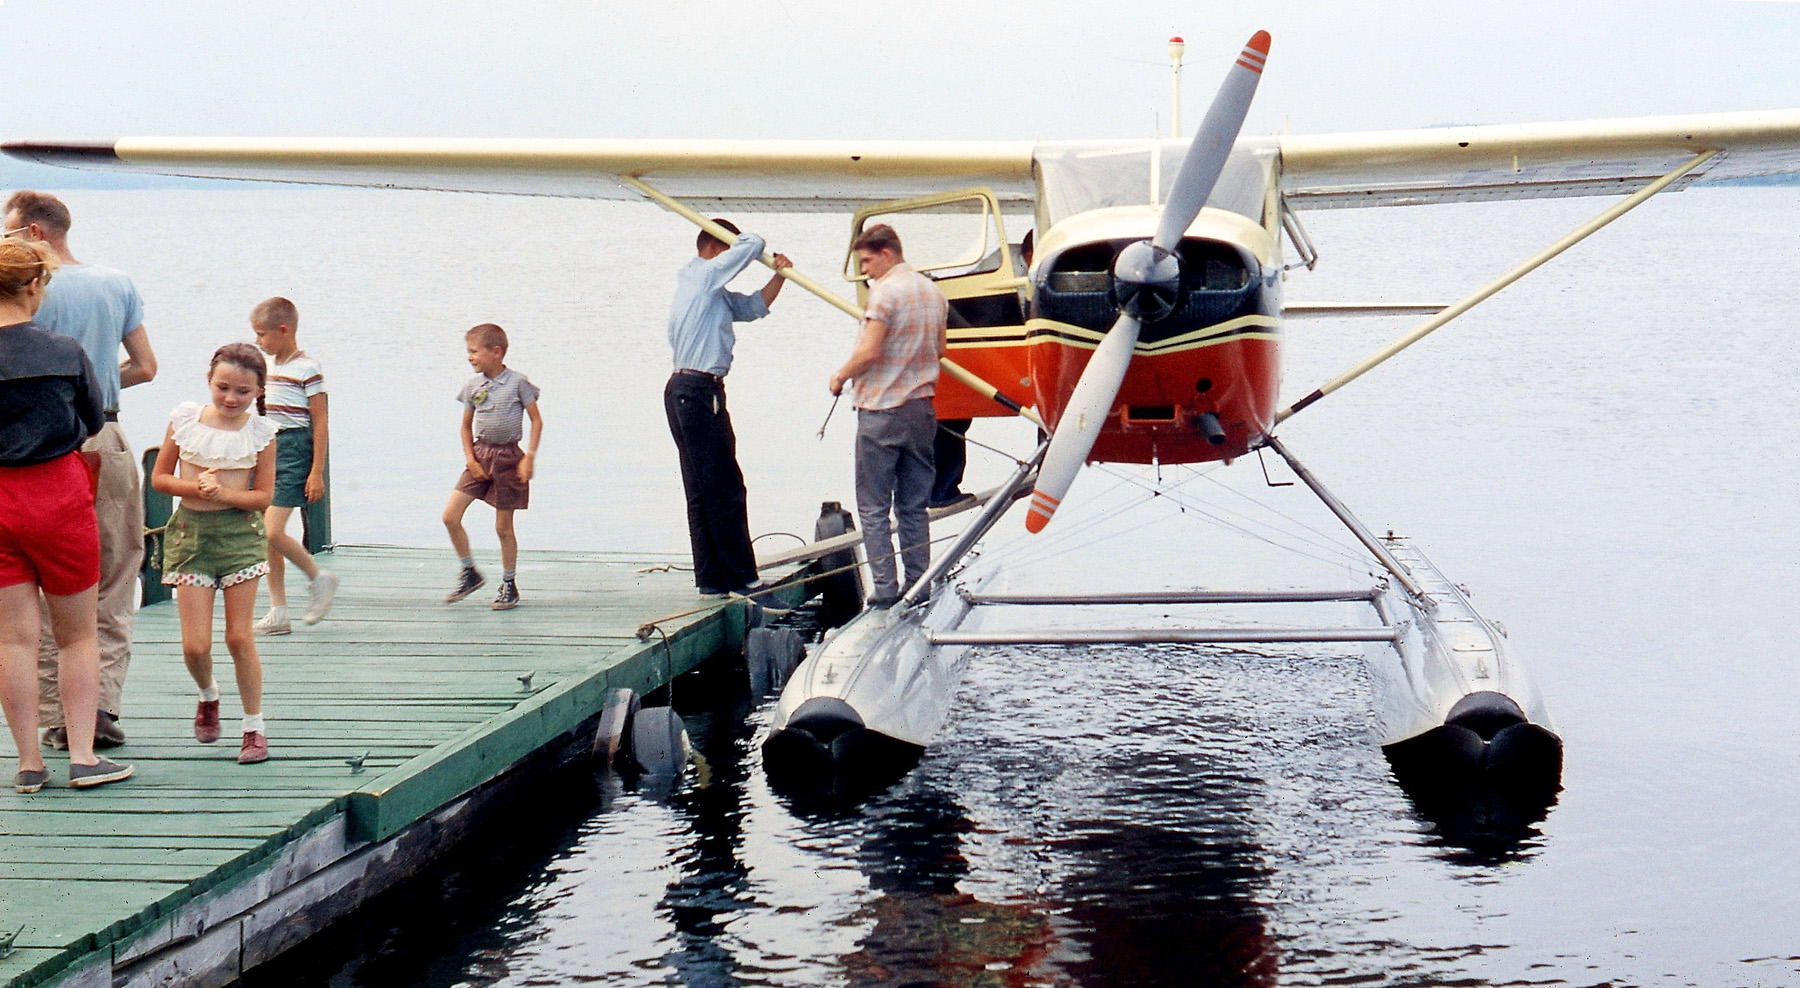 Our 1960 family camping holiday to Maine's Lake Sebago State Park, and Dad sprung for our first plane ride, a 15-minute seaplane tour. He caught us disembarking, me readjusting my shorts ... thanks, Dad! View full size.